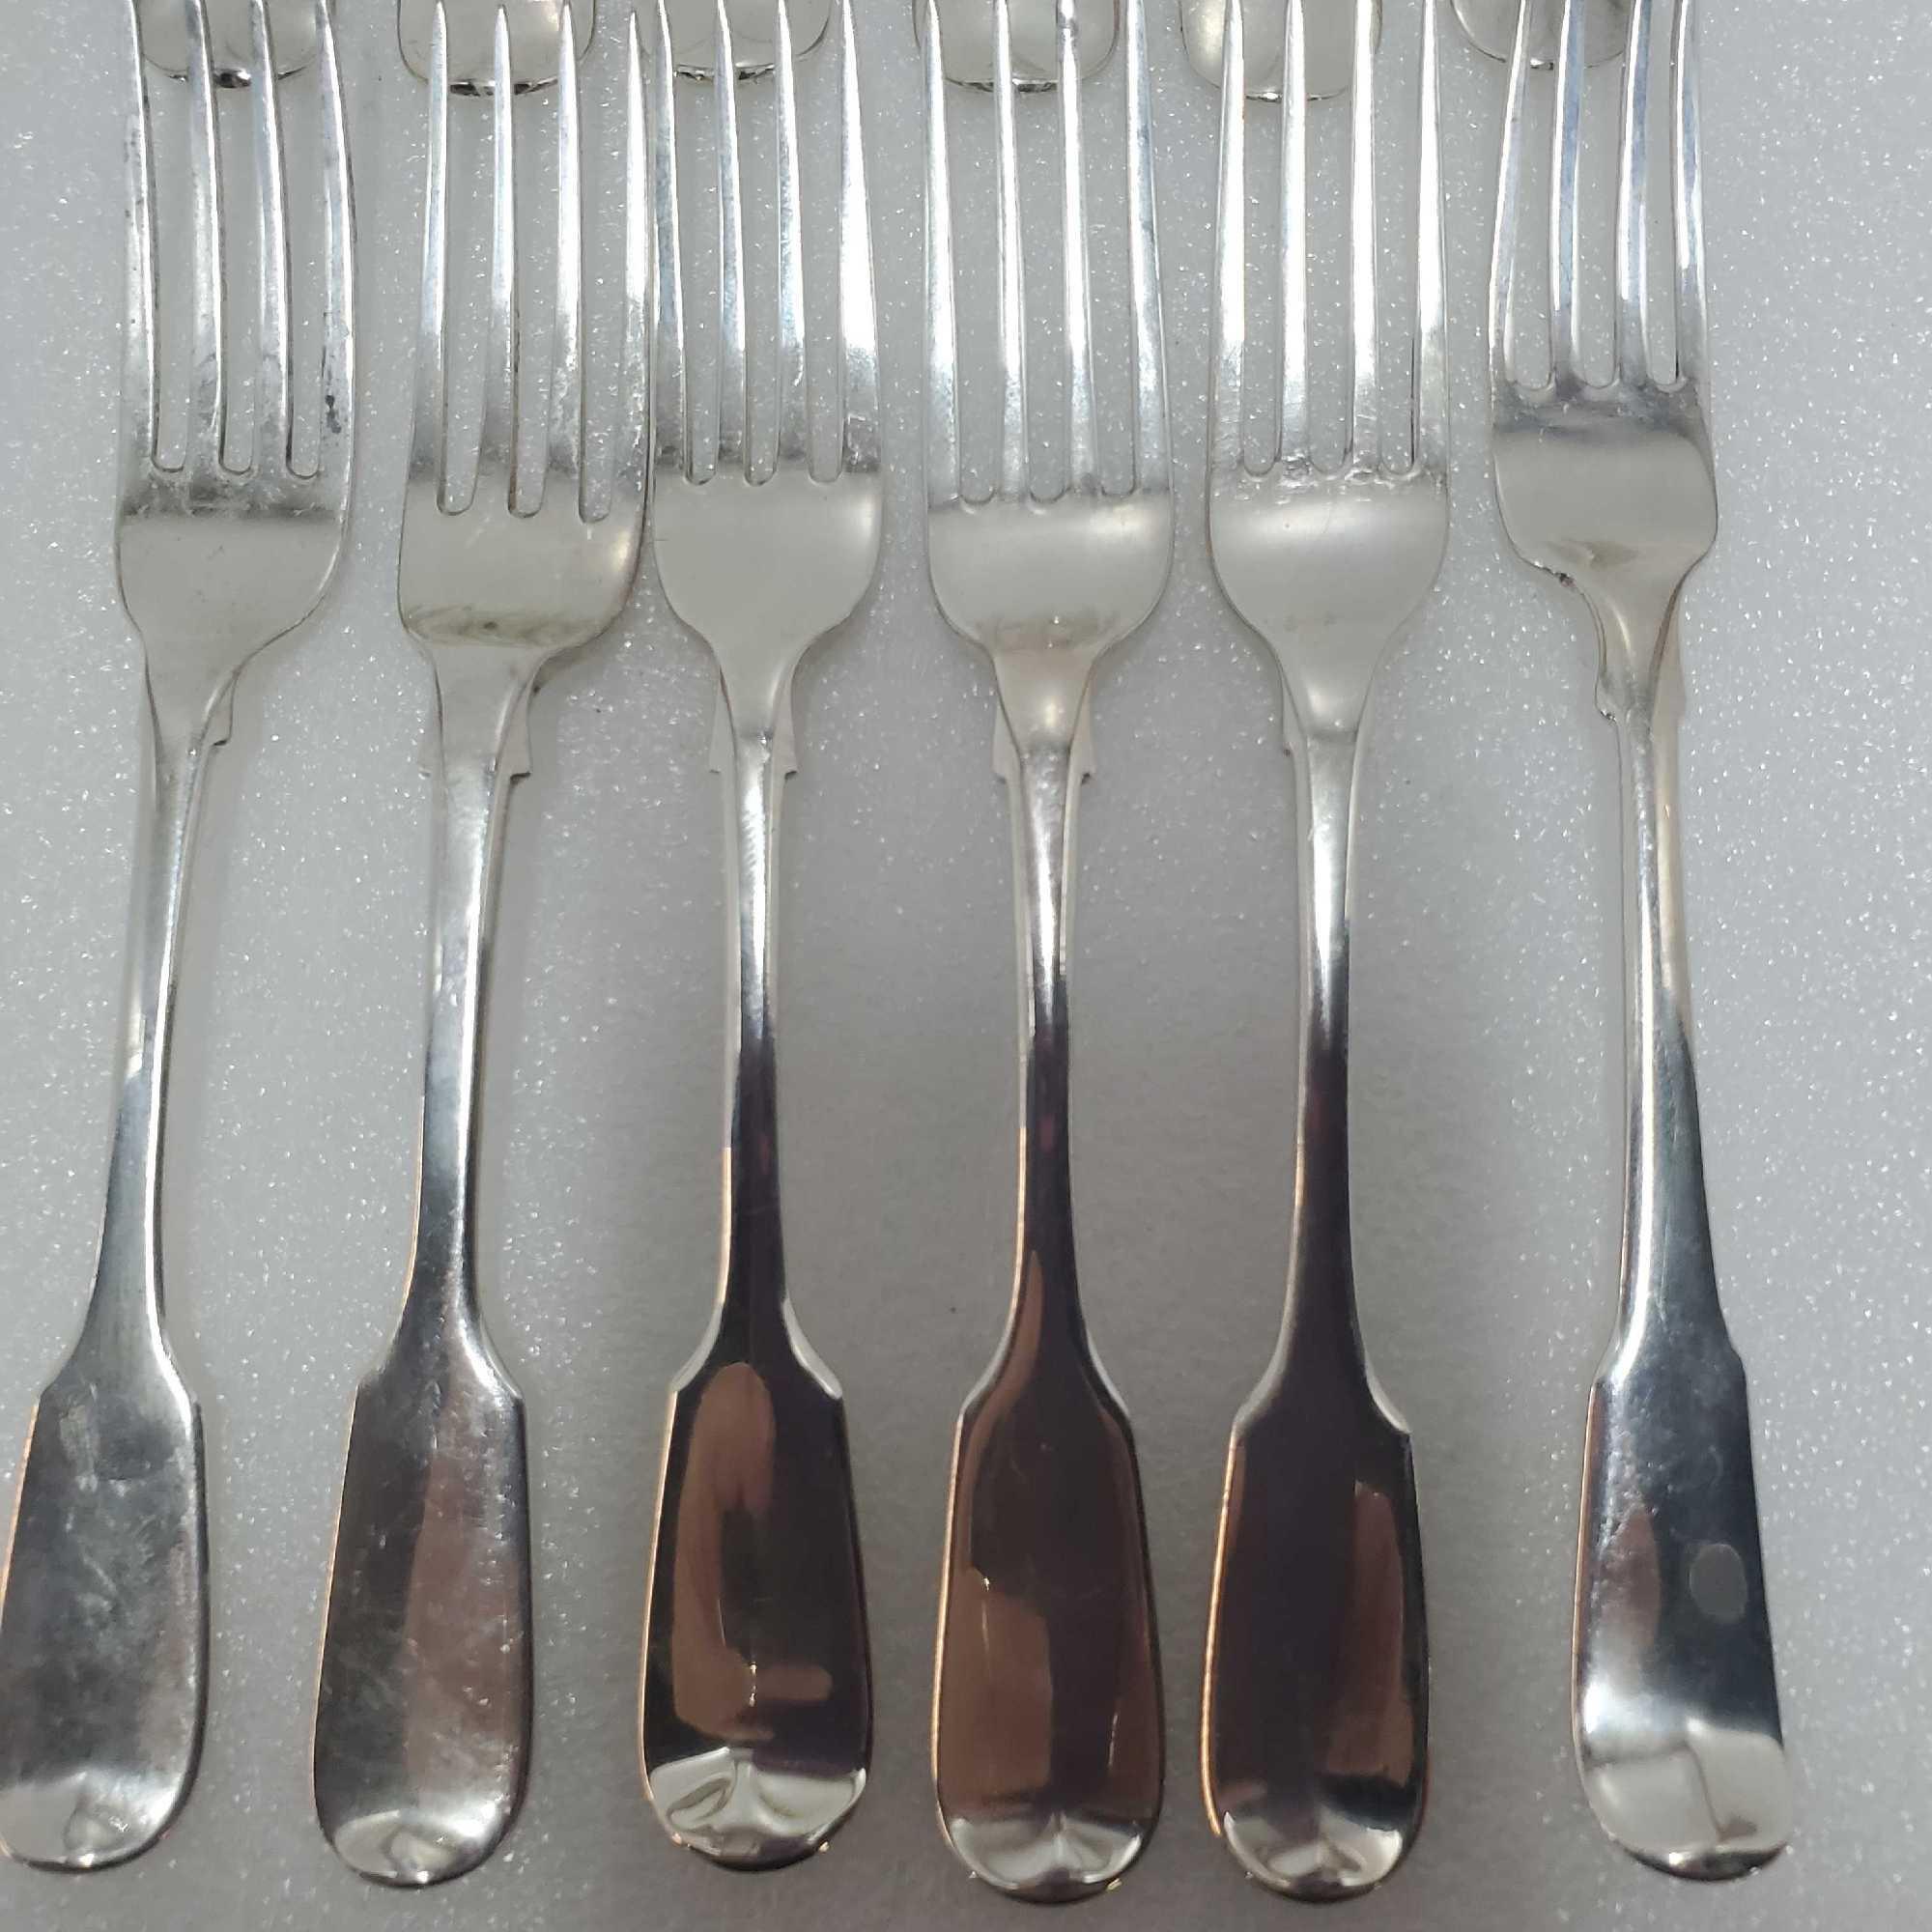 12 Sterling Silver 19th C. English Fiddleback Forks 6 3/4" Vairious Makers & Dates